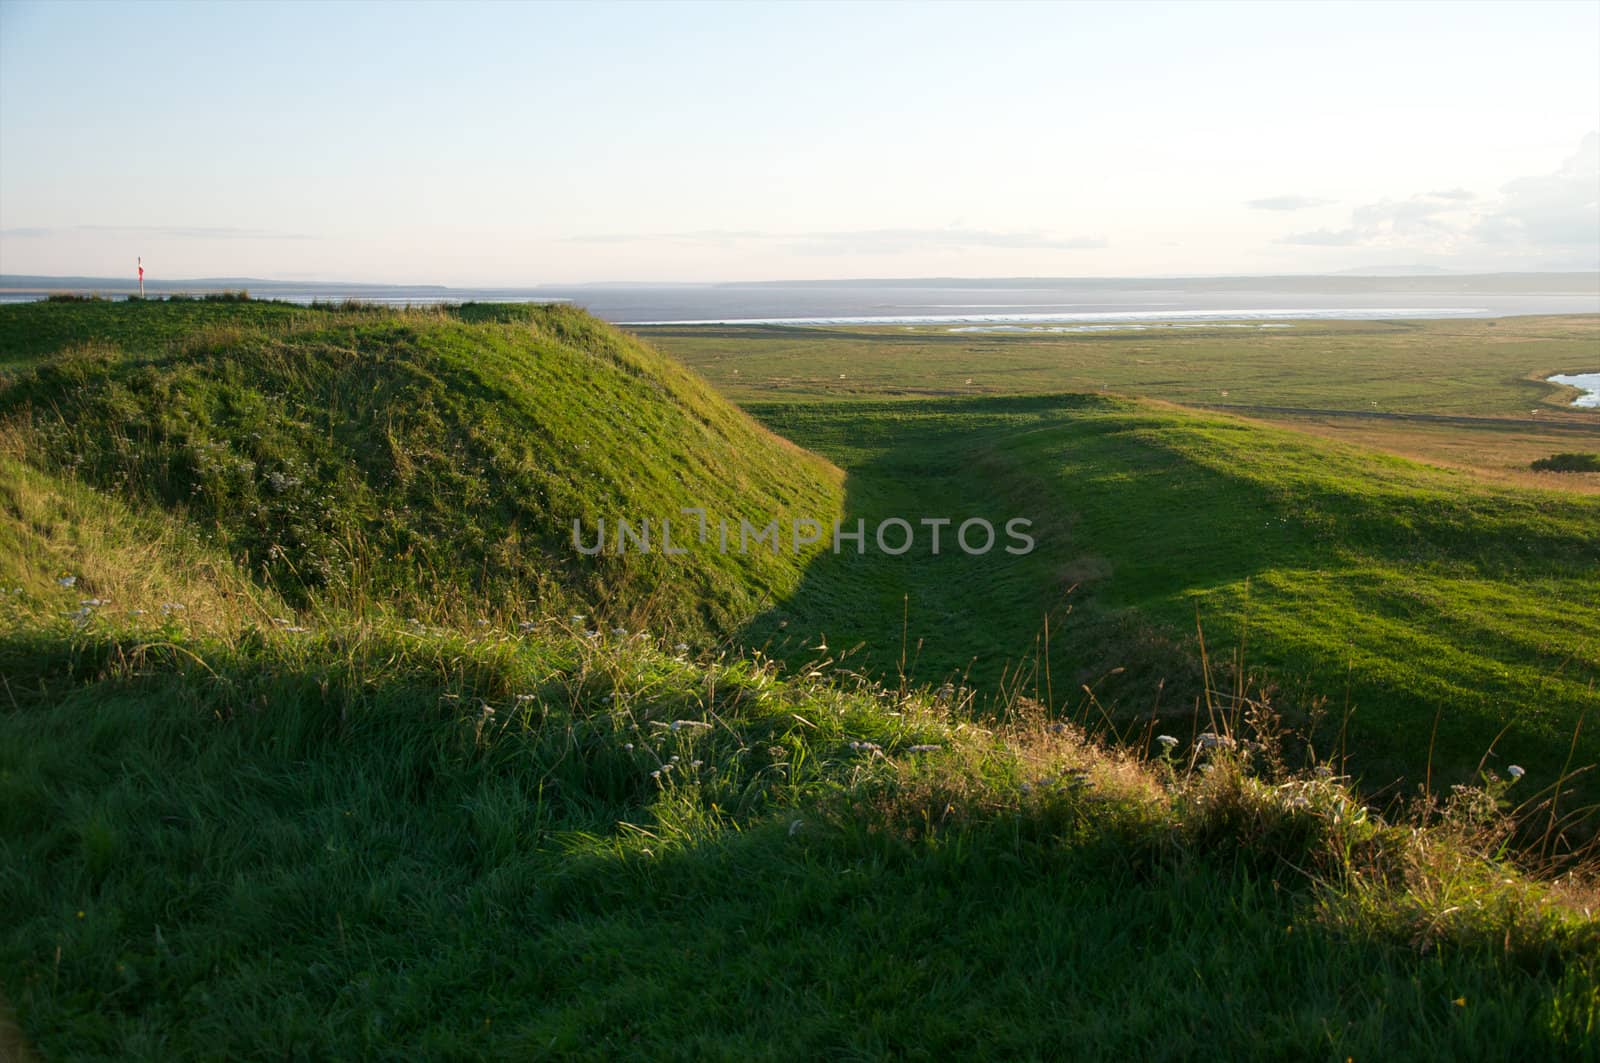 The ramparts of Fort Beausejour, an 18th Century French fort in New Brunswick, Canada